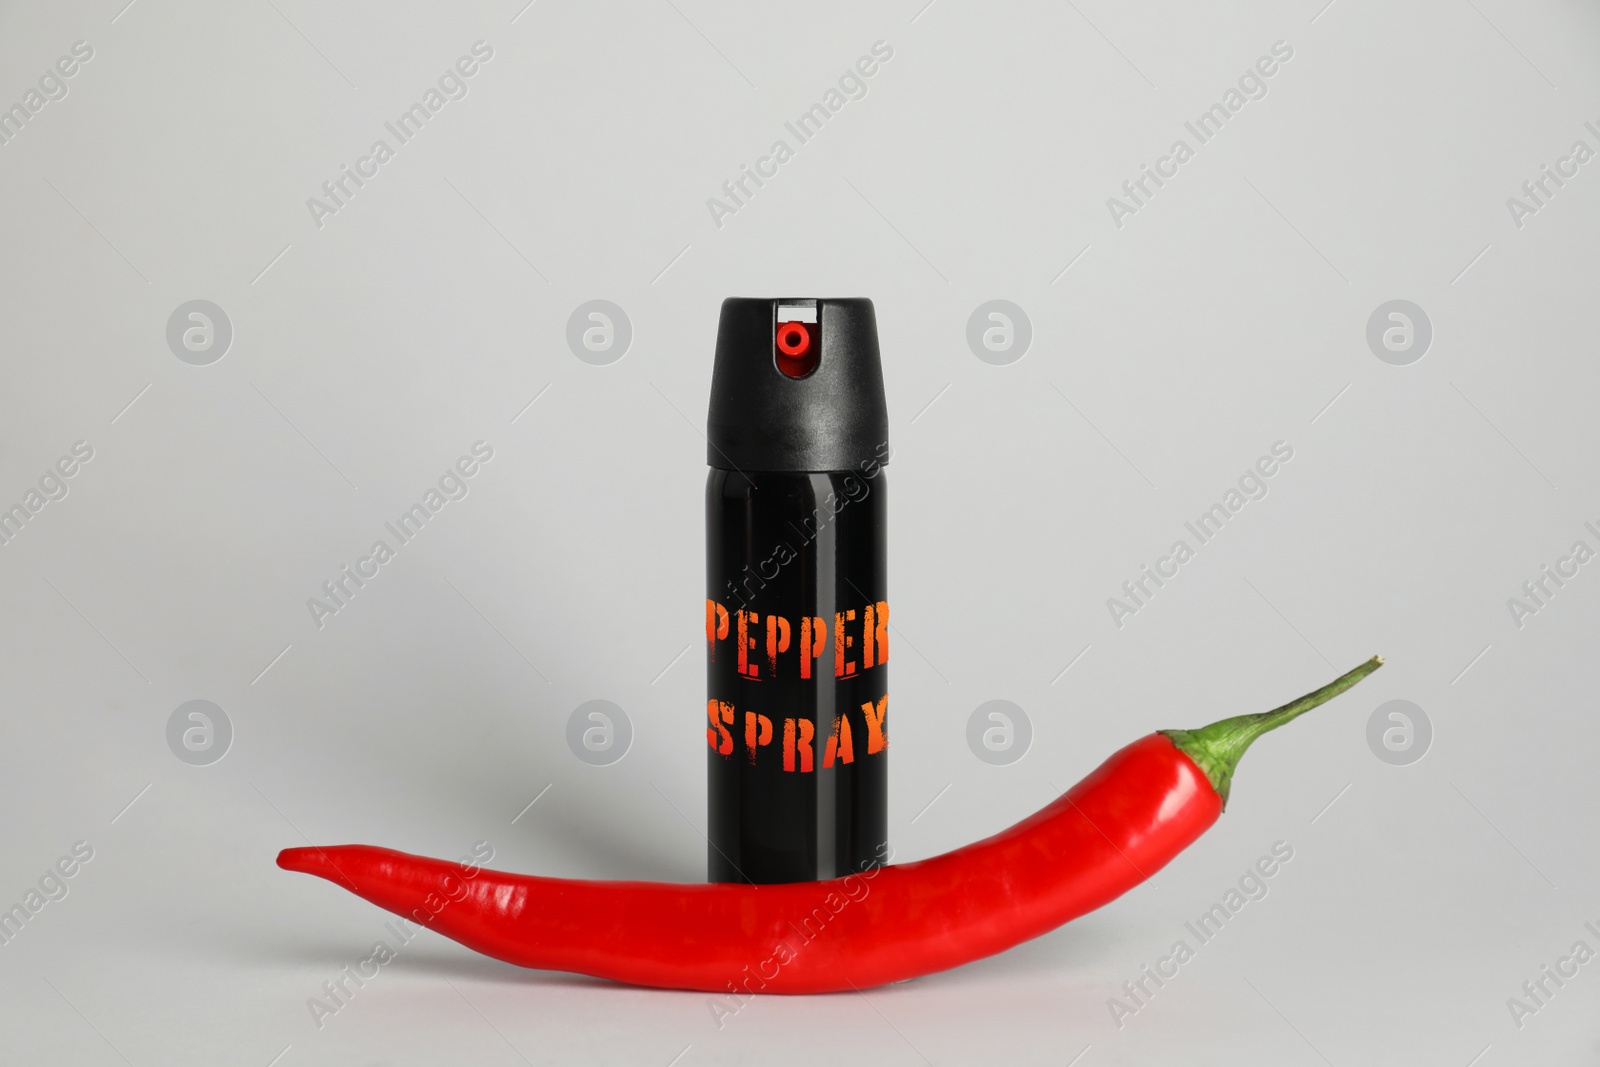 Image of Bottle of gas spray and fresh chili pepper on grey background